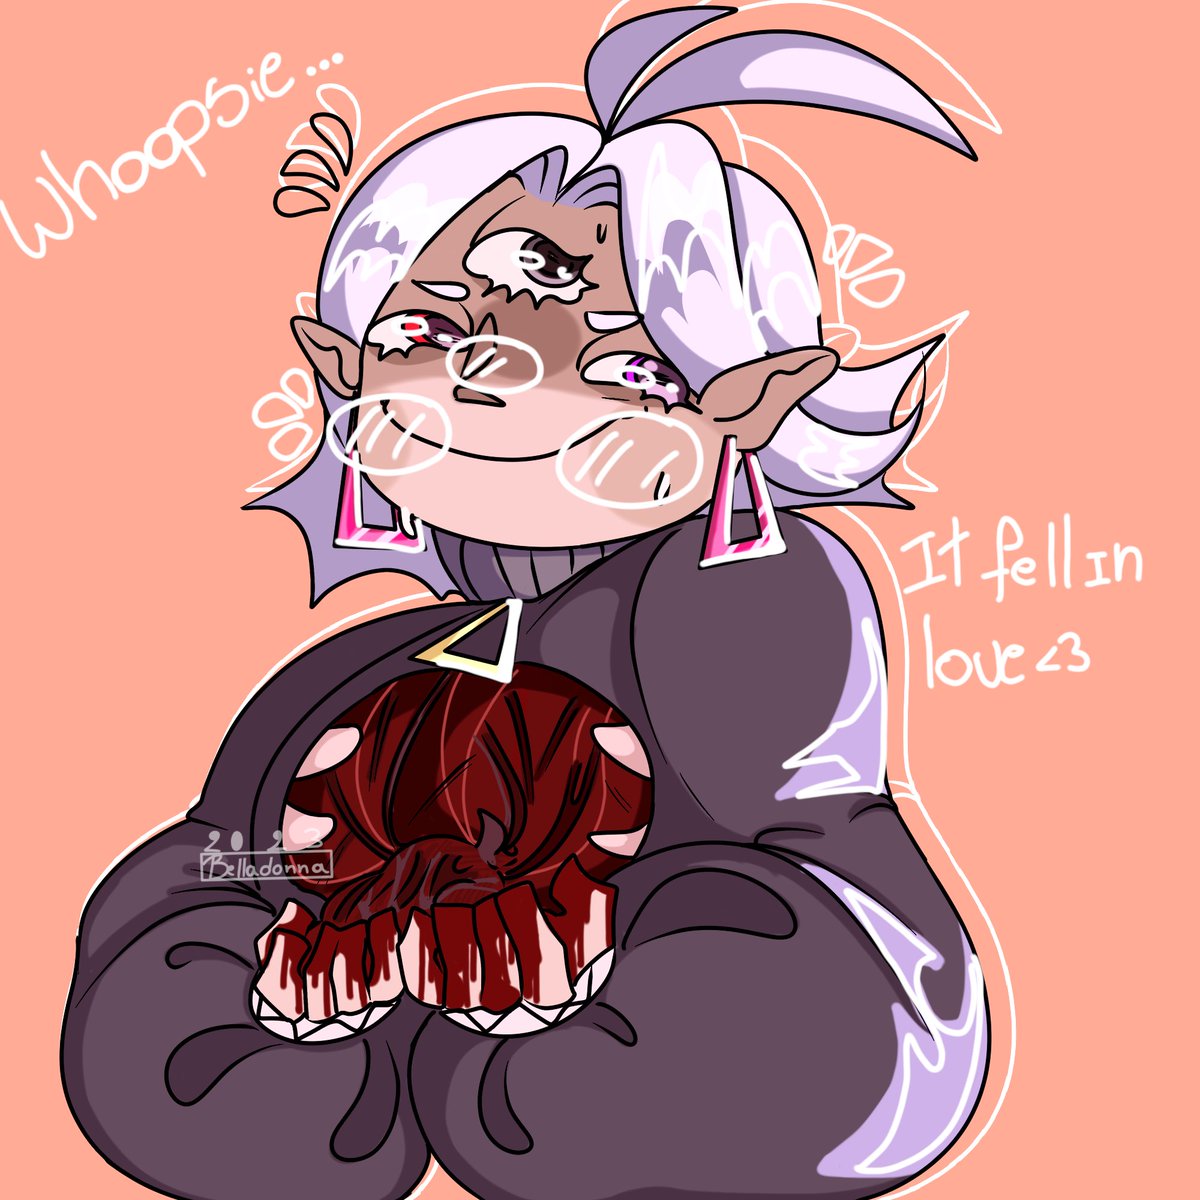 Tw//gore/heart out Whoopsie i fell in love <3 (This is so stupid lol)